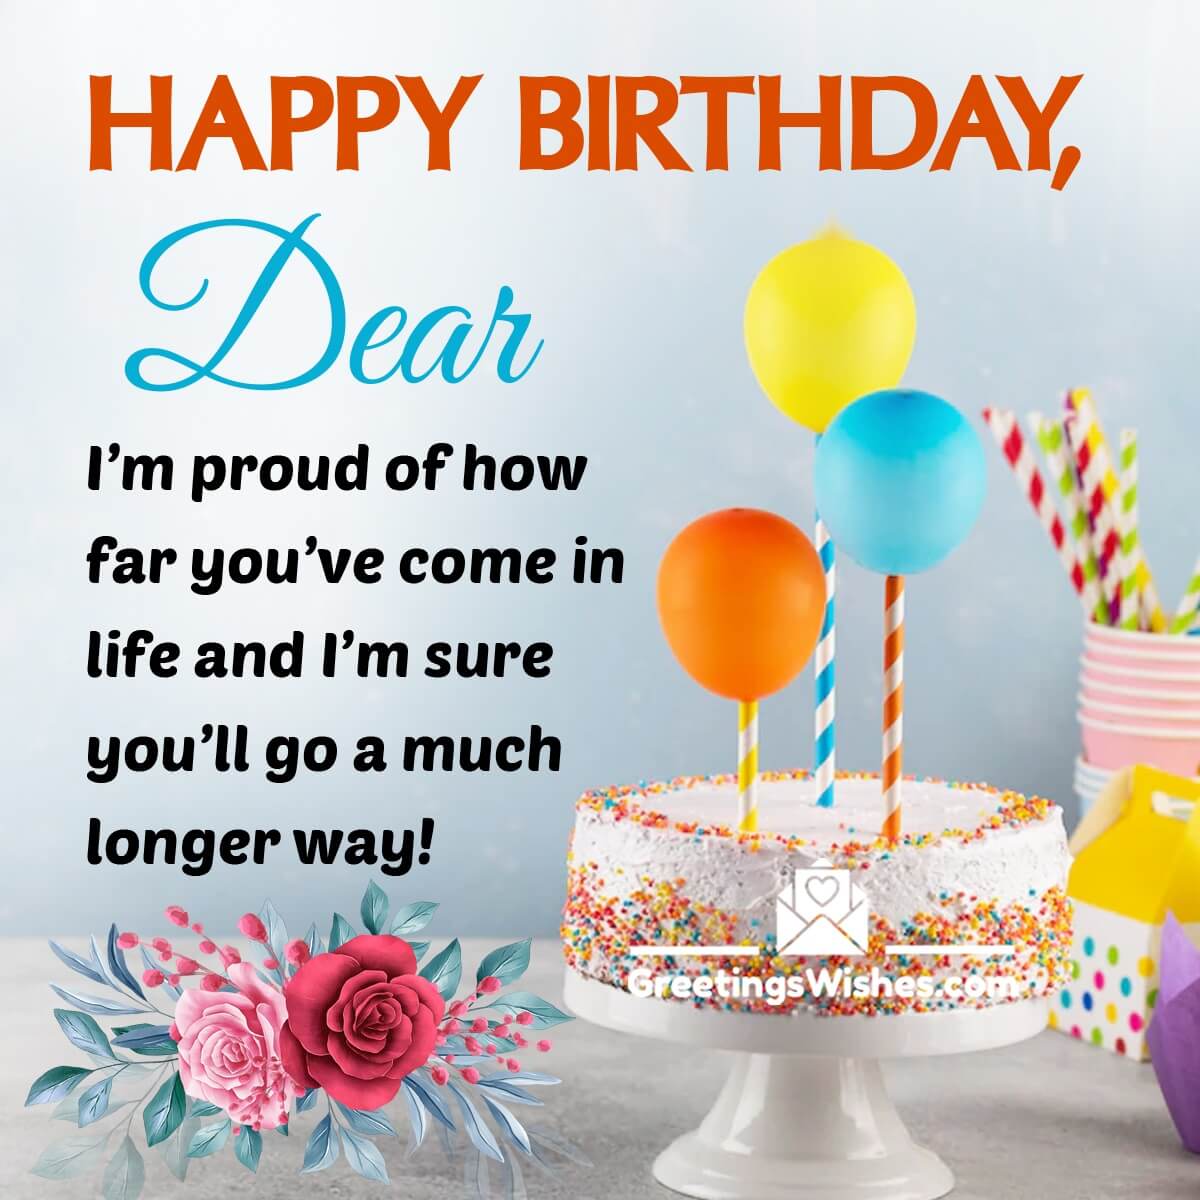 Inspirational Birthday Wishes - Greetings Wishes